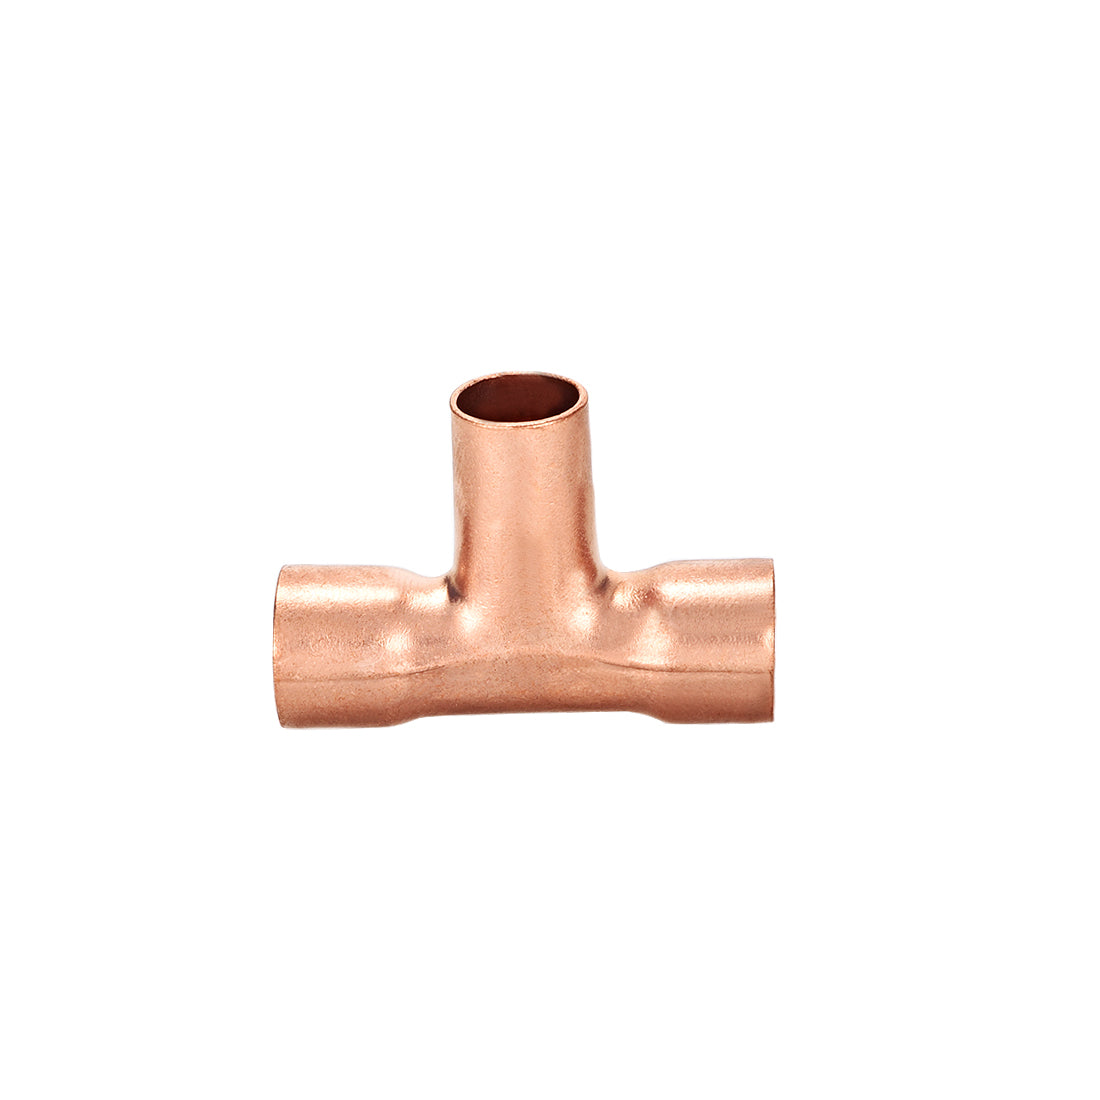 Uxcell Uxcell 7/8-inch x 5/8-inch x 7/8-inch Copper Reducing Tee Copper Pressure Pipe Fitting Conector  for Plumbing Supply and Refrigeration